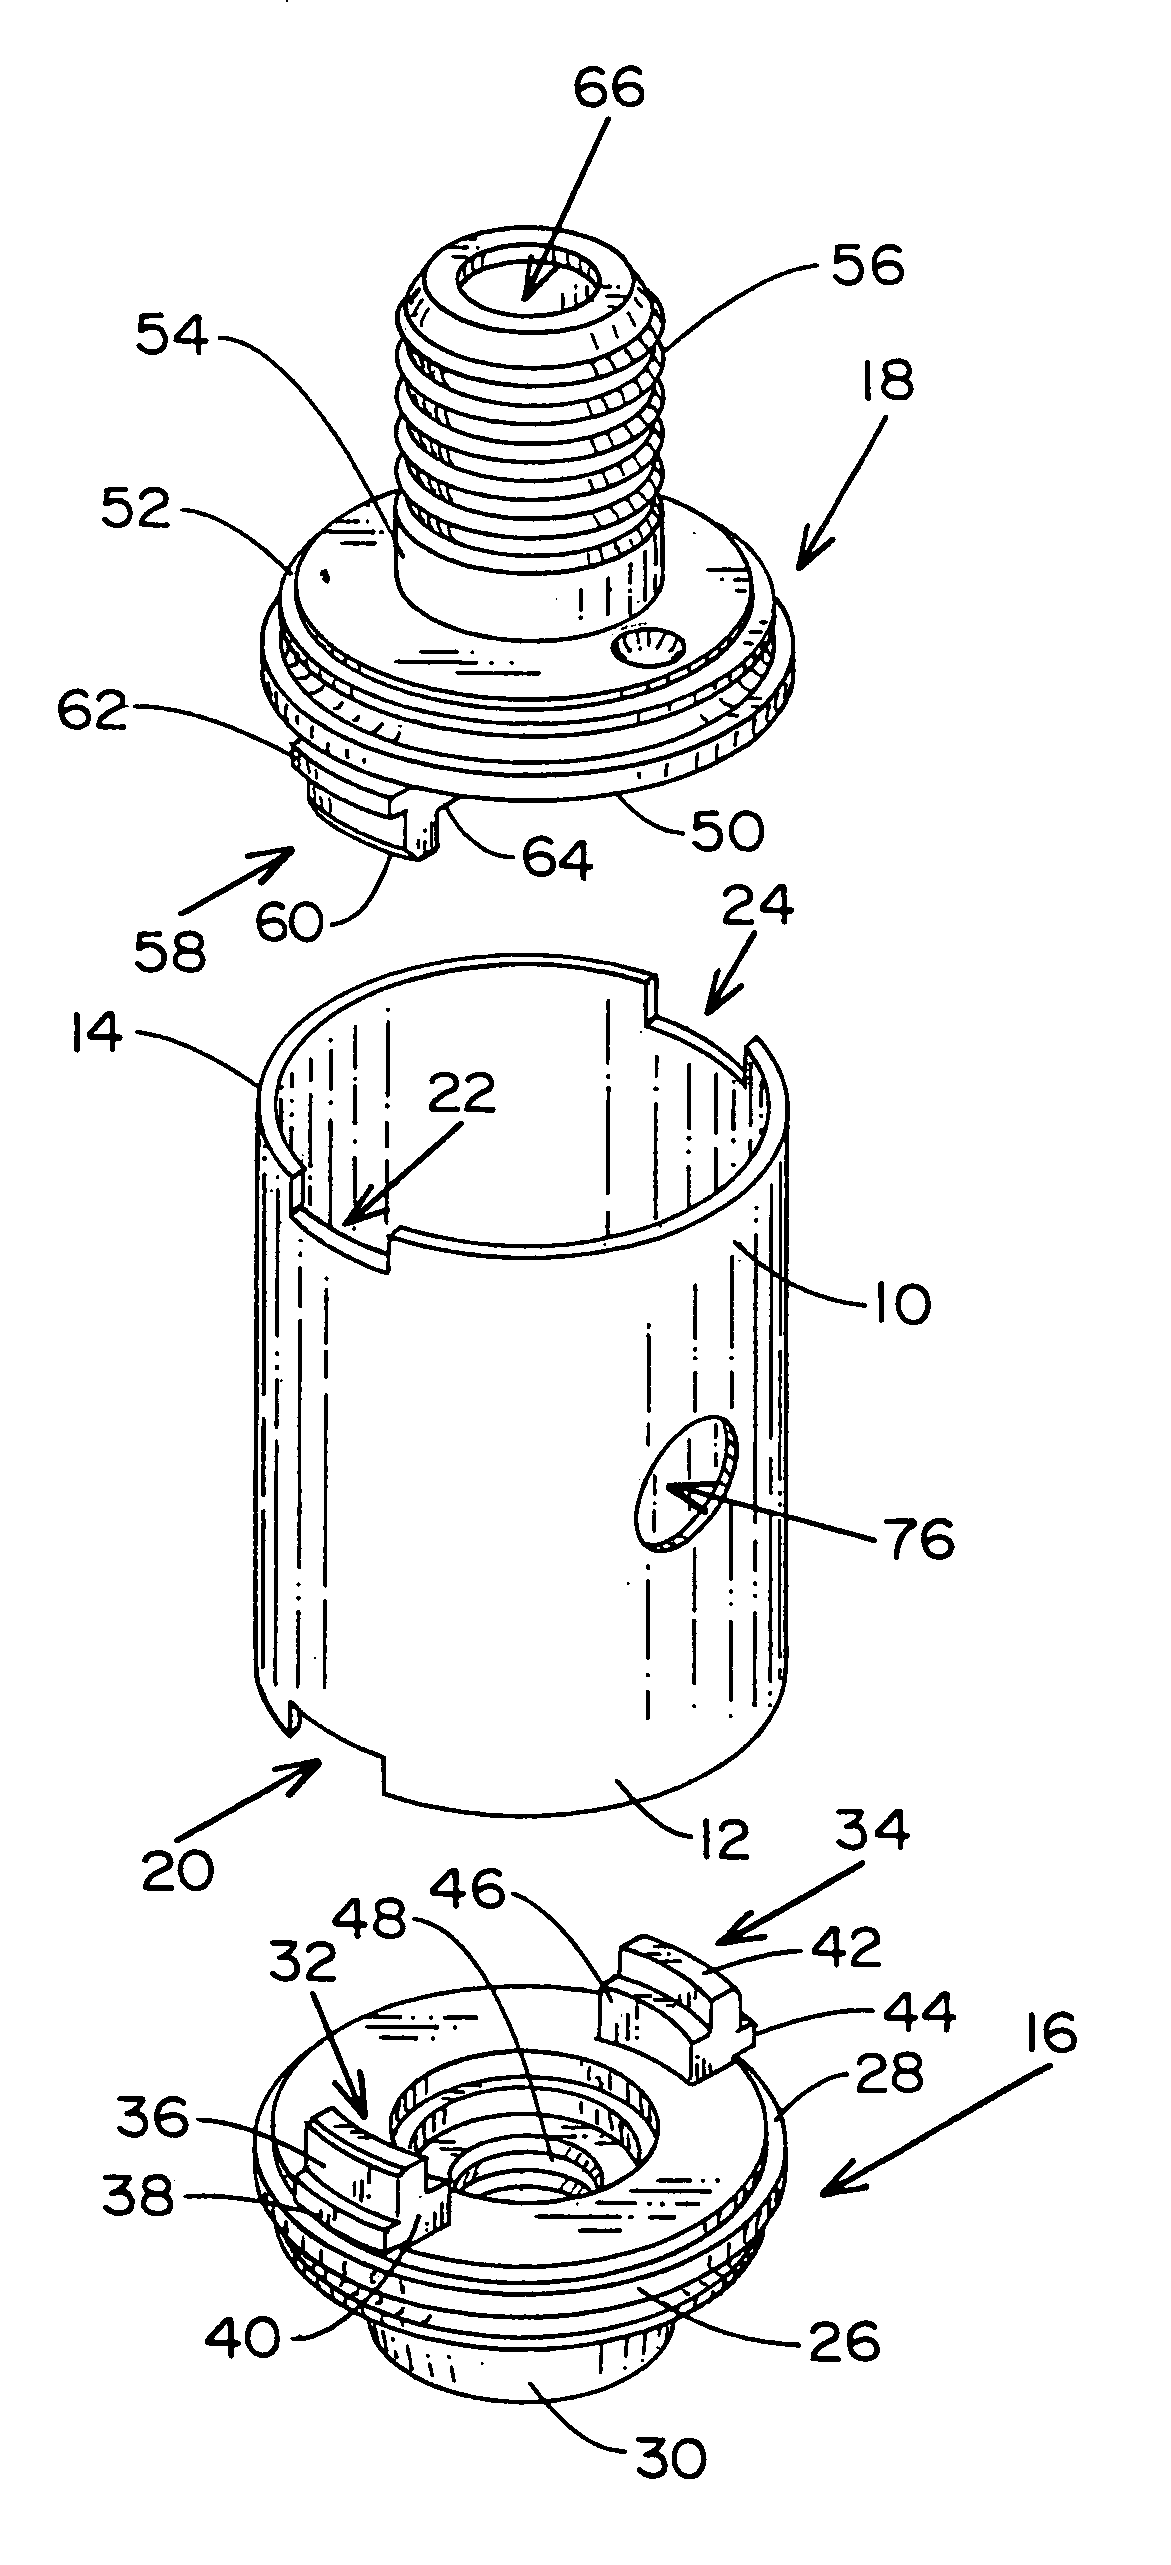 Electronic device enclosure with rotationally locked body and header